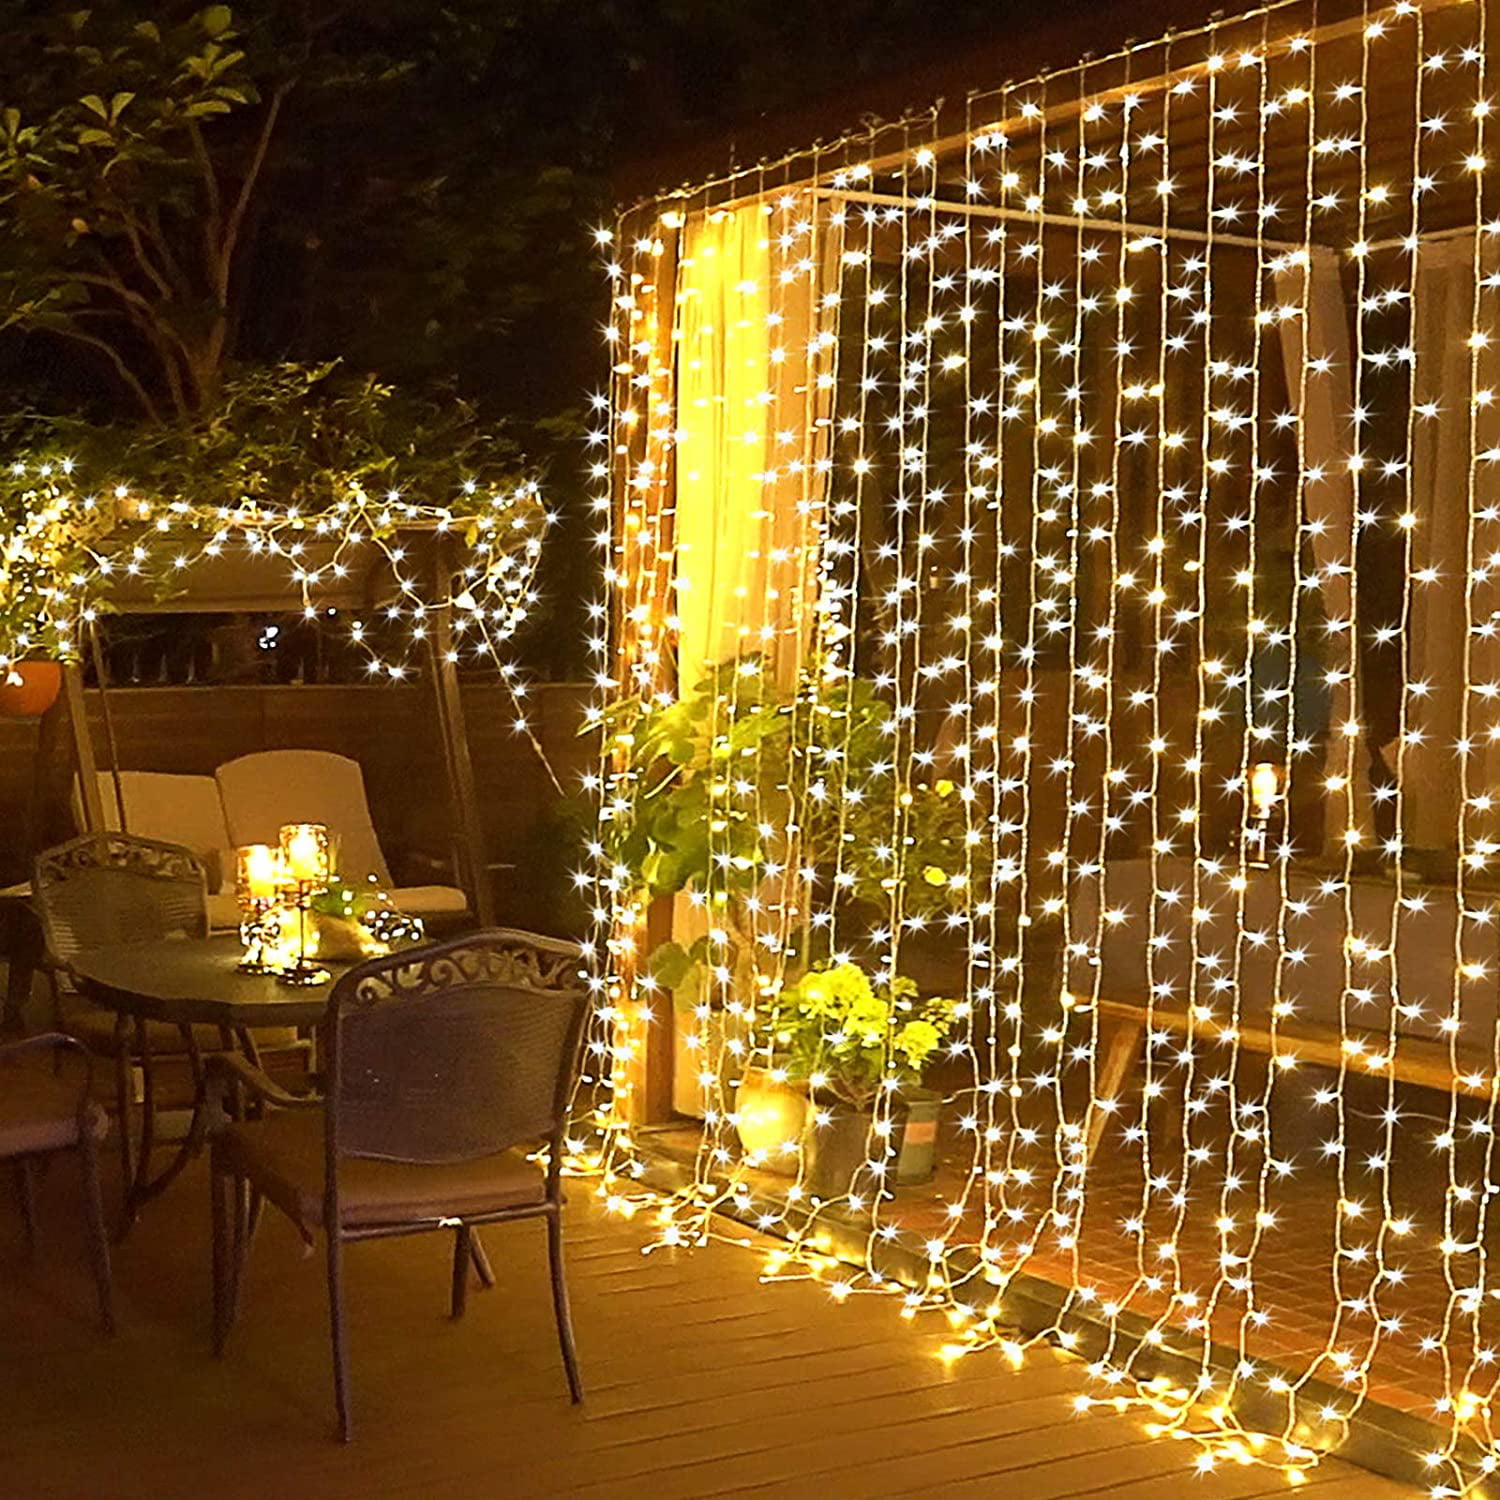 Outdoor LED Solar Lights Waterfall String Fairy Icicle Lights Party Garden Decor